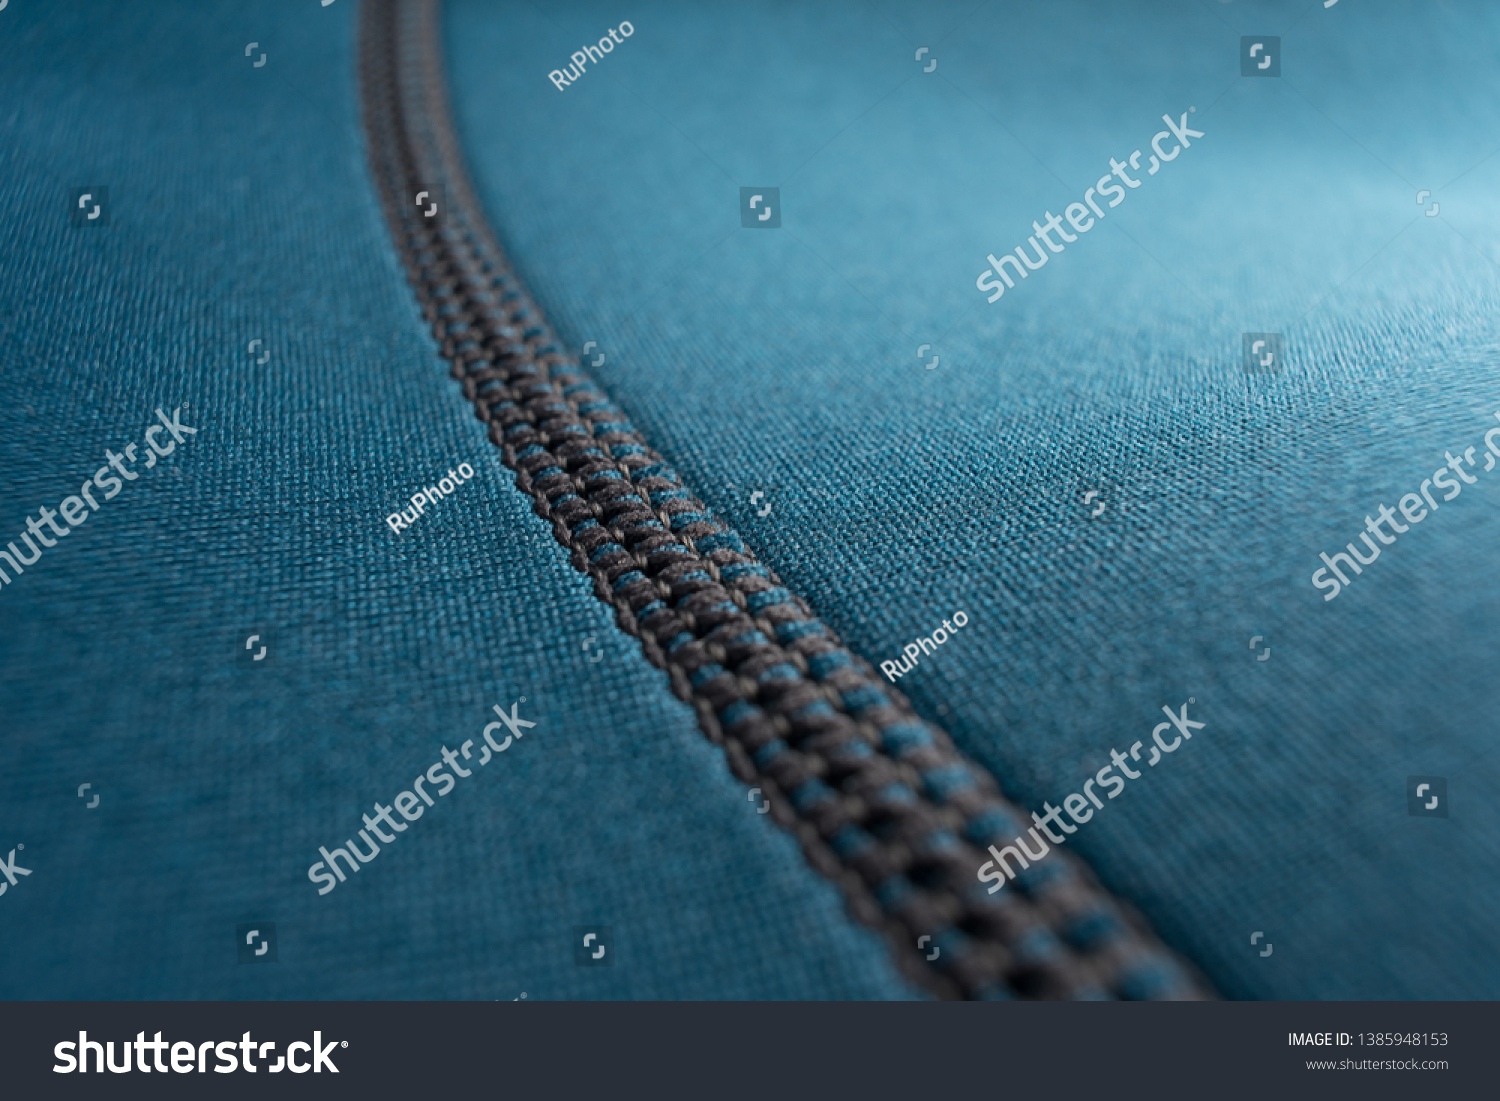 Close up of stitching along the seam of a blue neoprene scuba diving wetsuit #1385948153